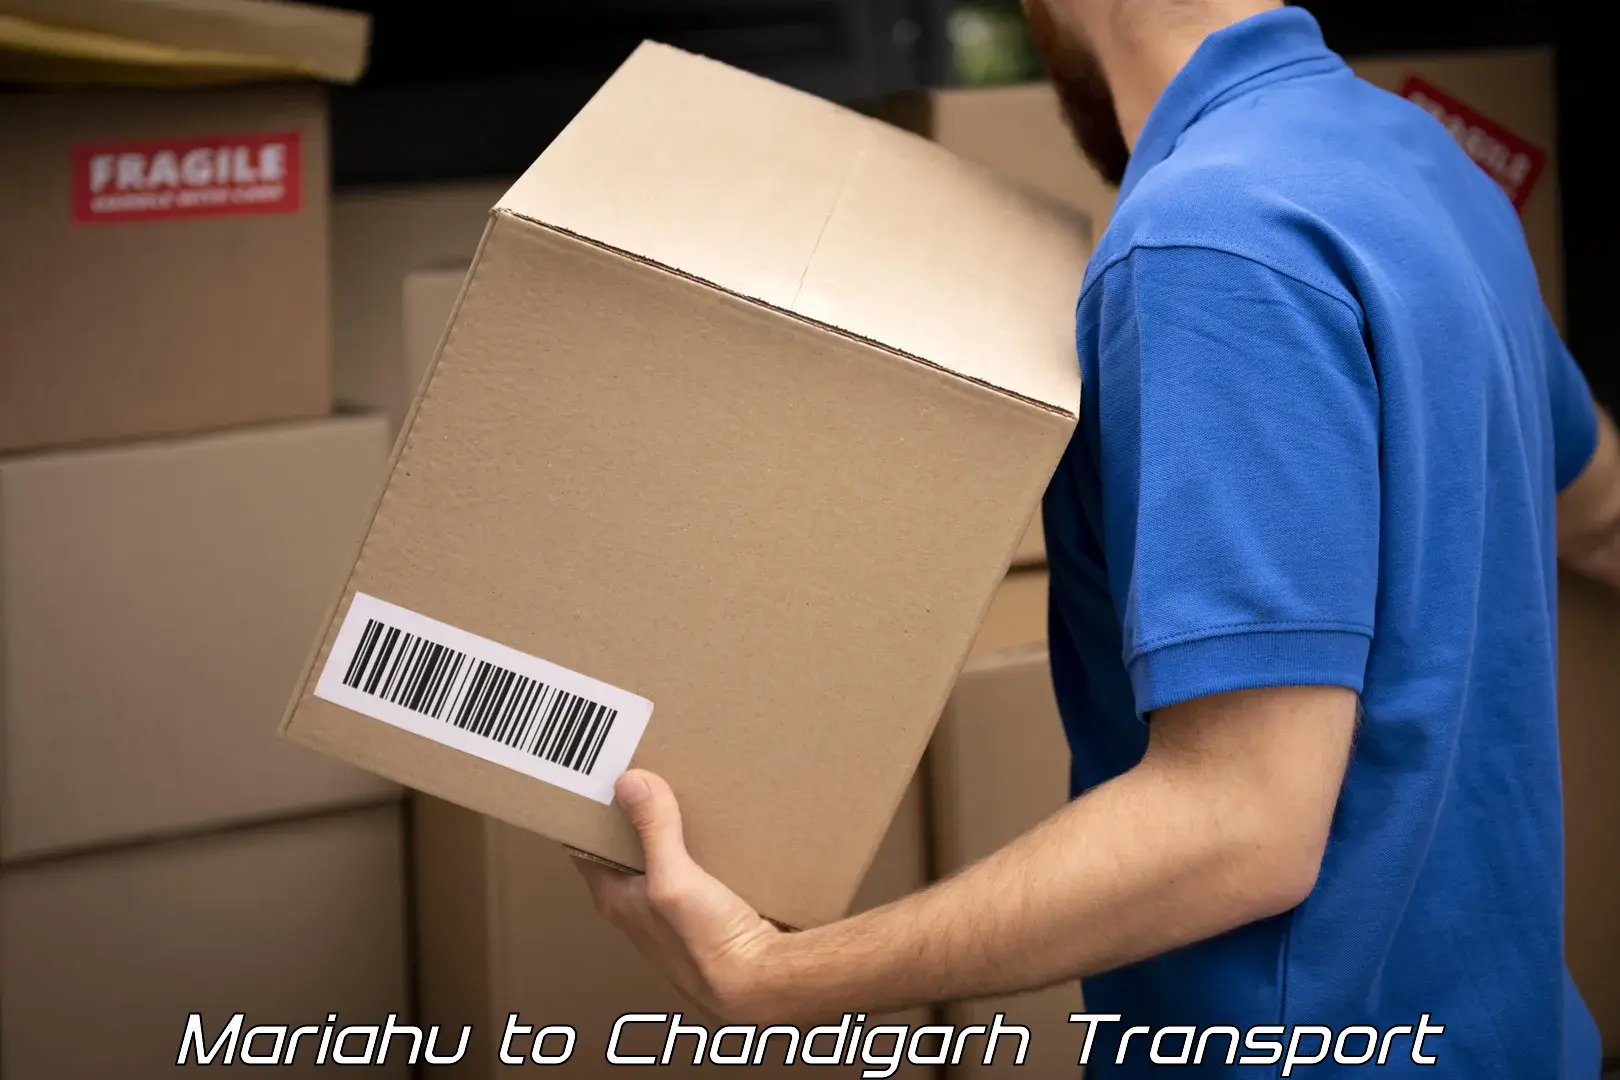 Container transport service Mariahu to Chandigarh